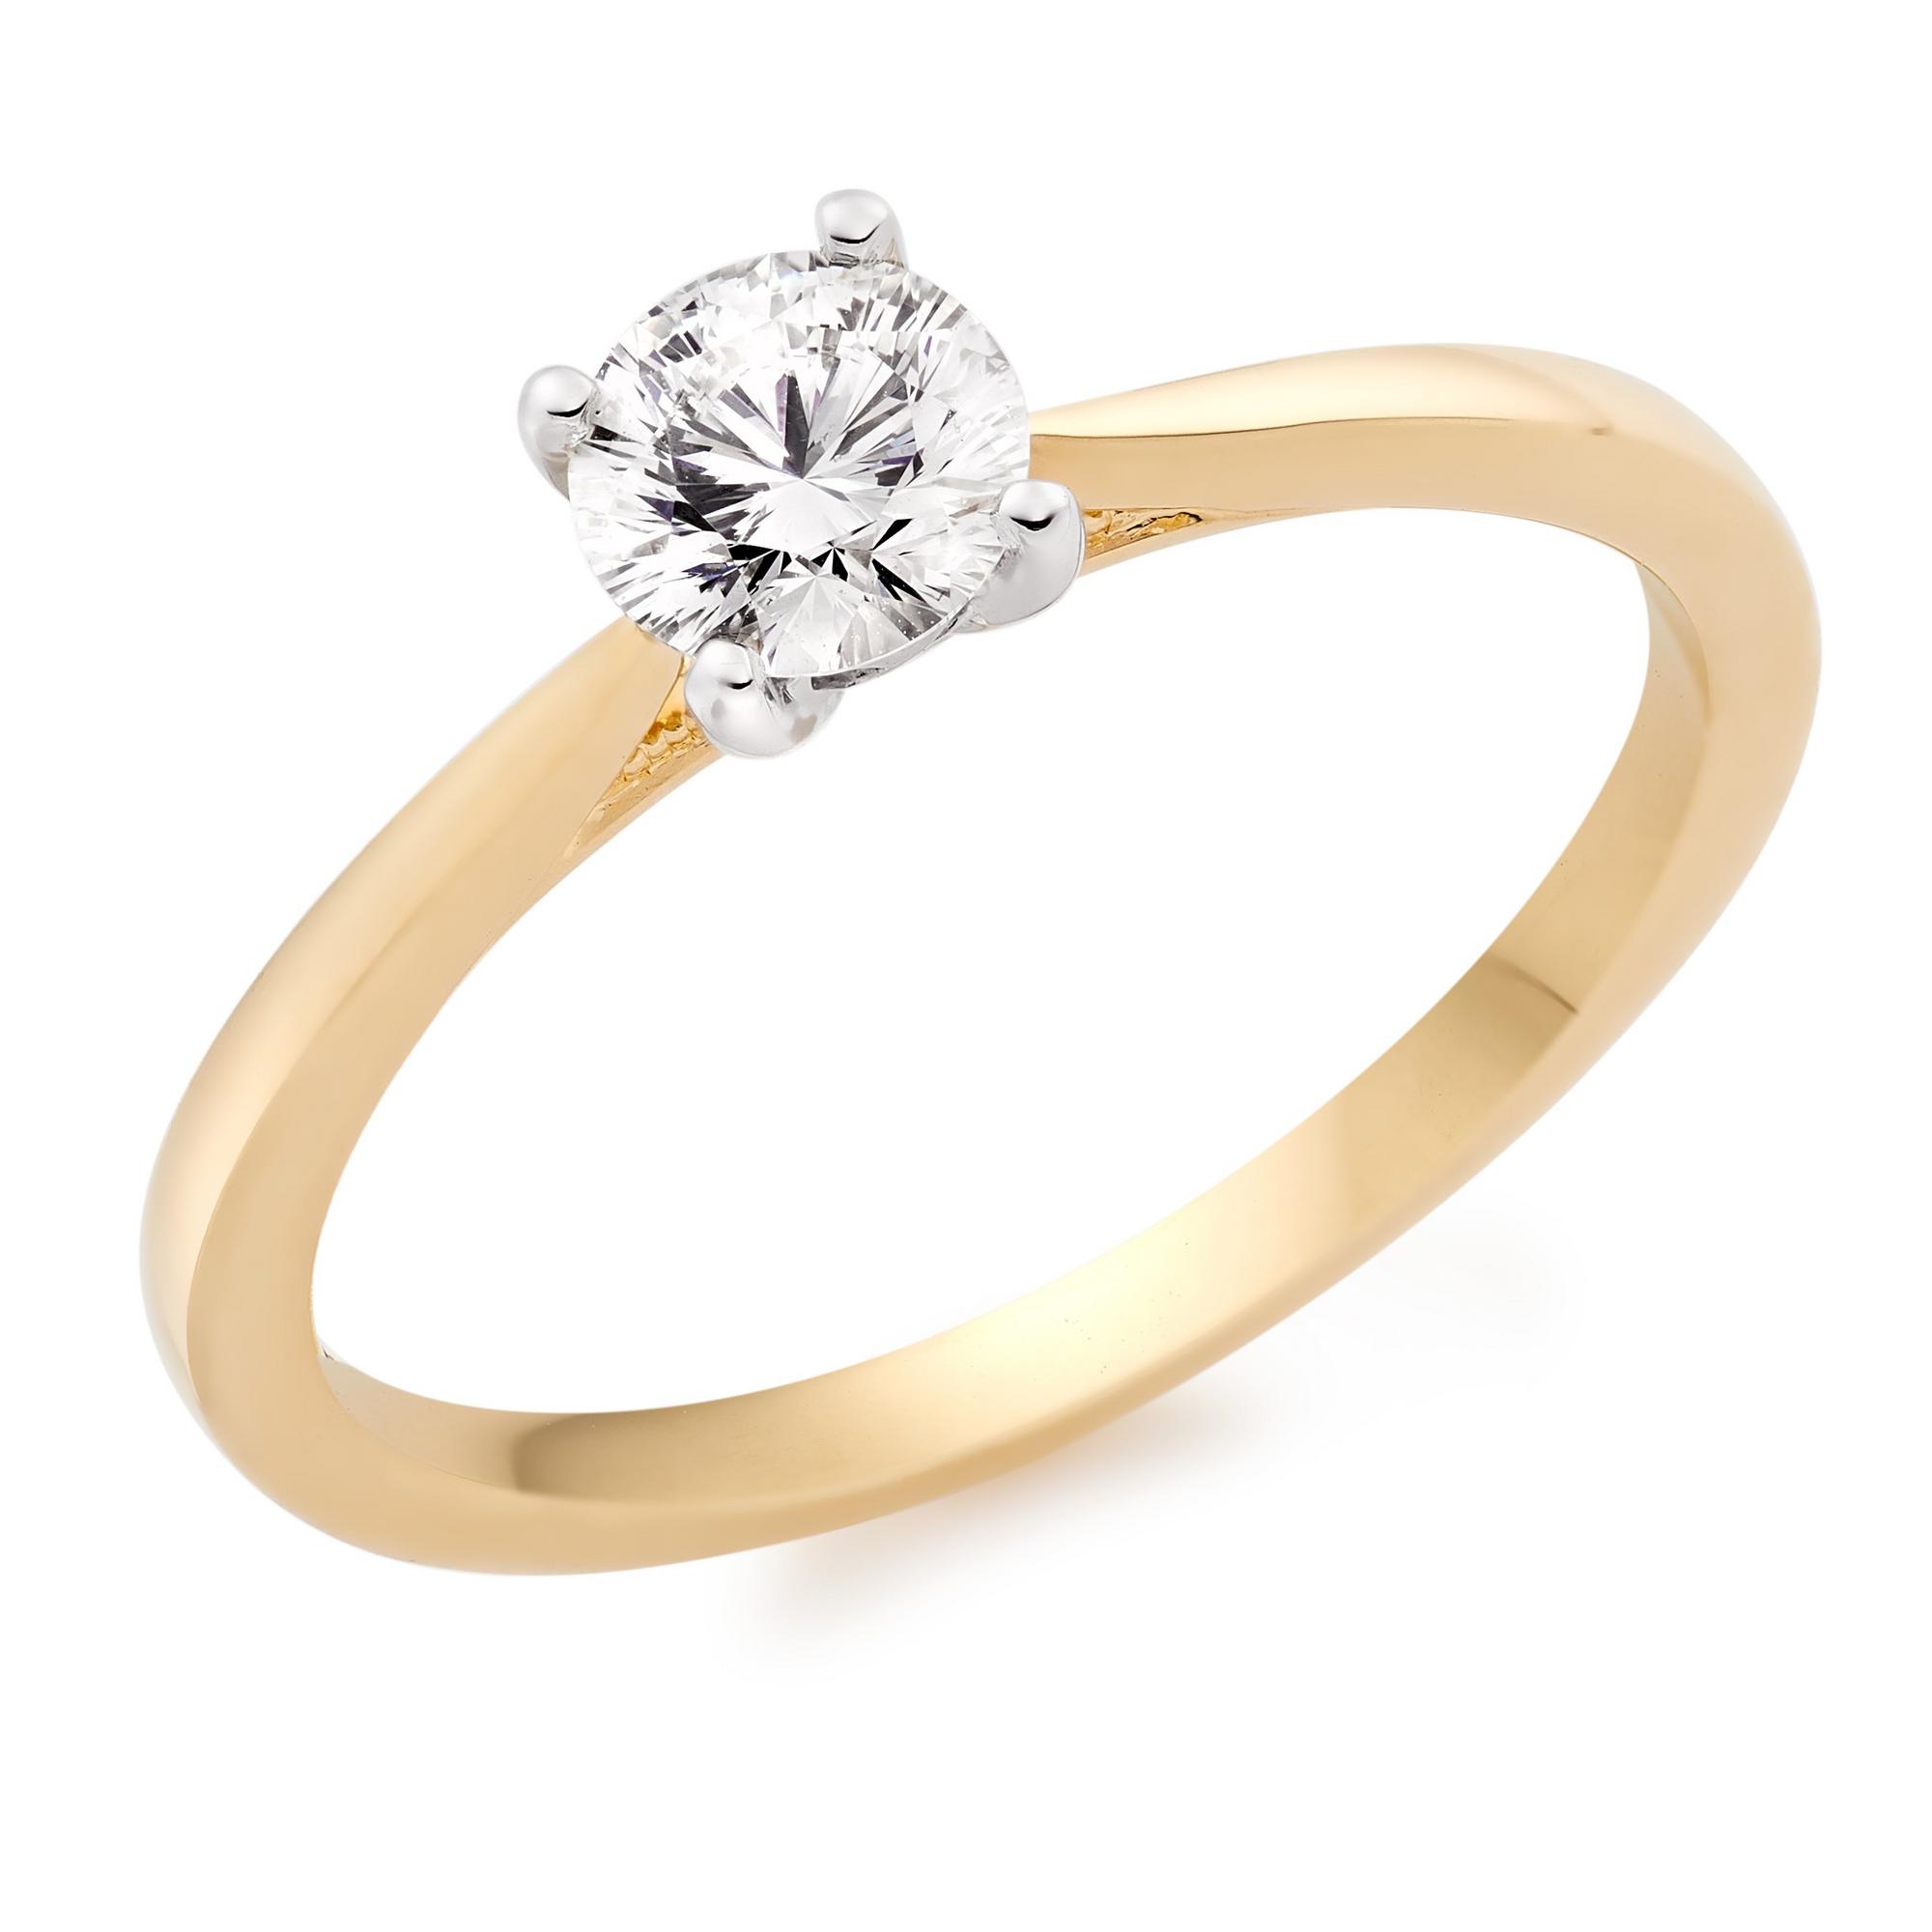 Beyond Brilliance 18ct Yellow Gold Diamond Solitaire Ring